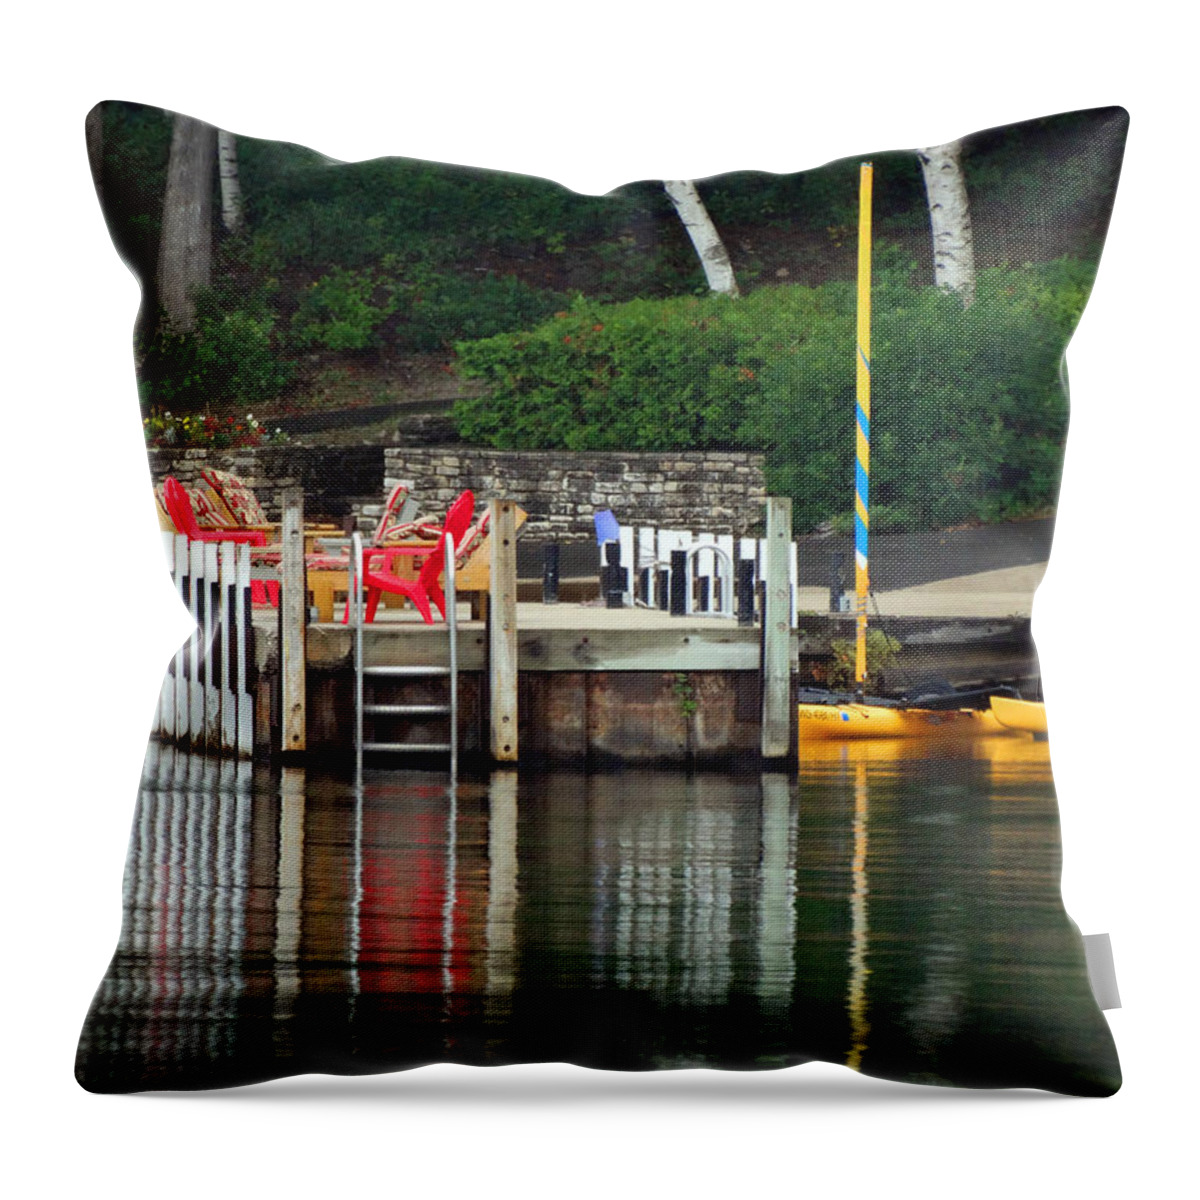 Dock Reflection Throw Pillow featuring the photograph Little Sister Dock Reflection by David T Wilkinson